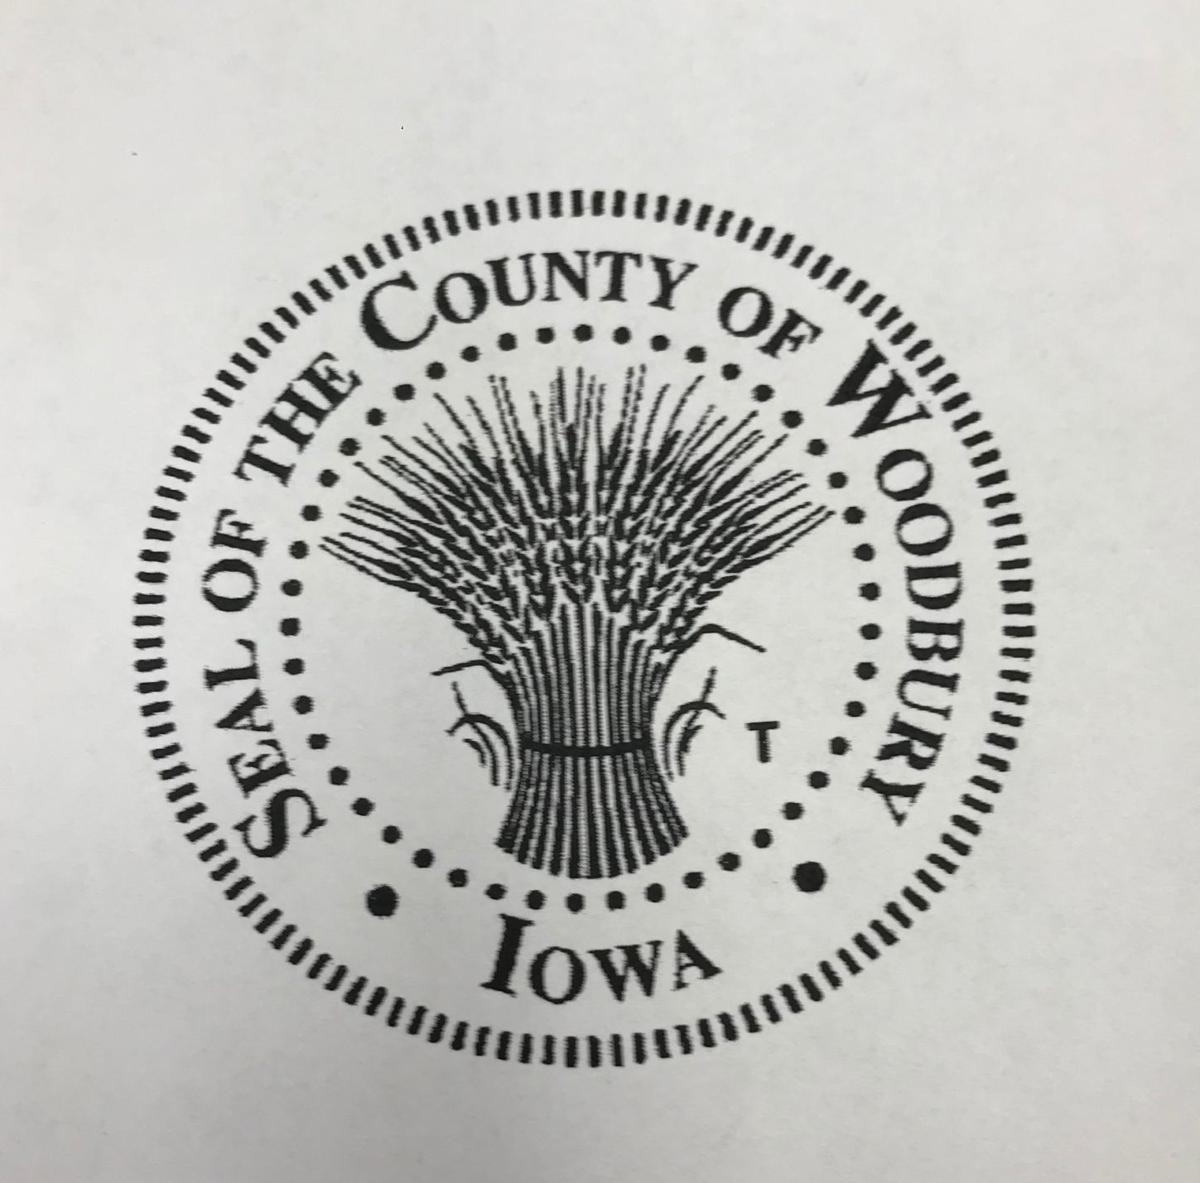 New County Seal Will Be Shown On Woodbury County Ballots